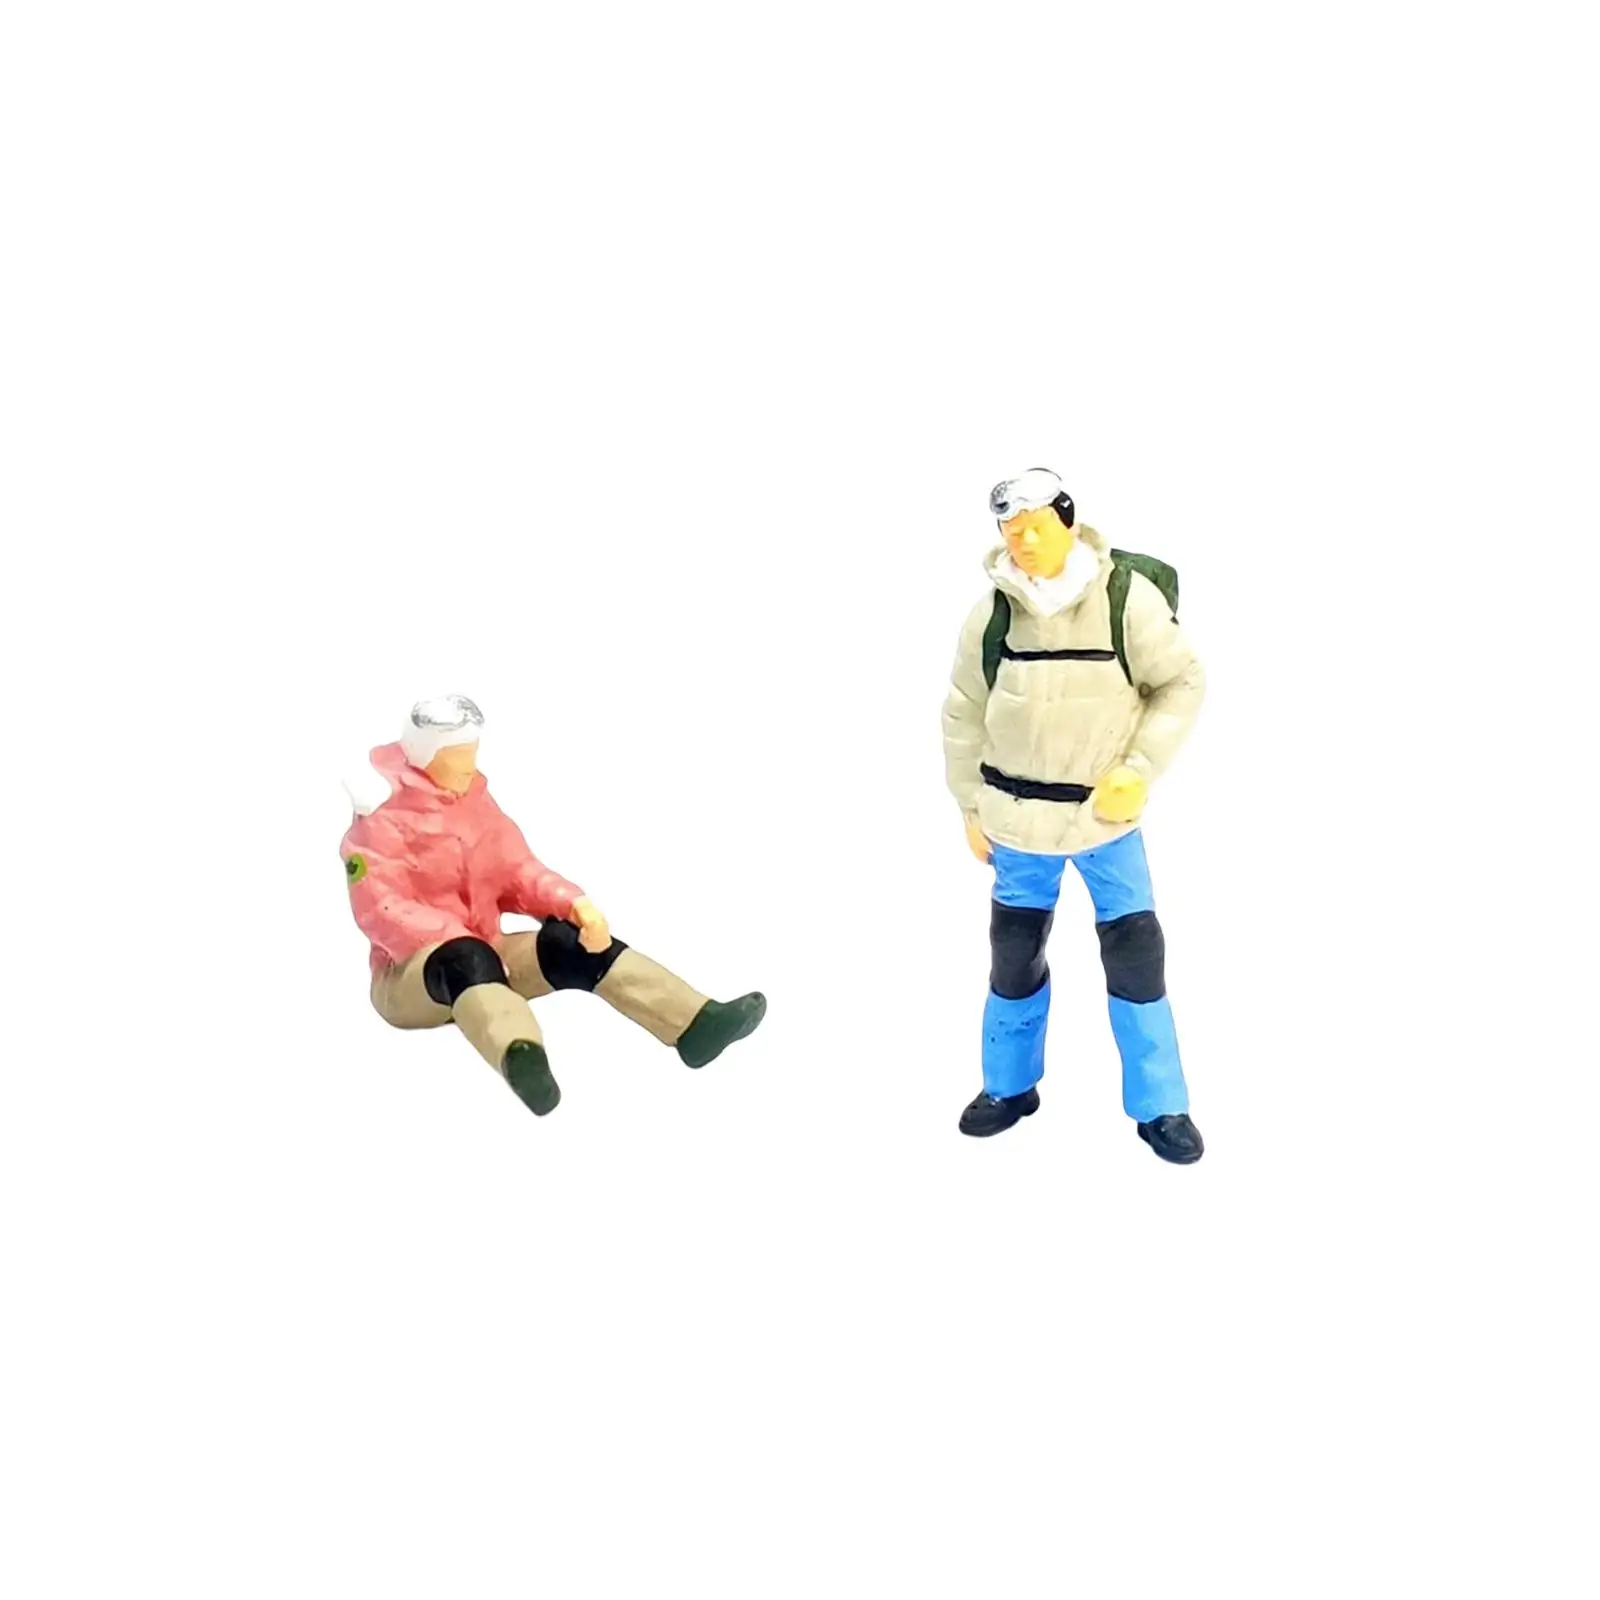 2x 1/87 Climbing People Figurines Sitting Standing Model Role Play Figure